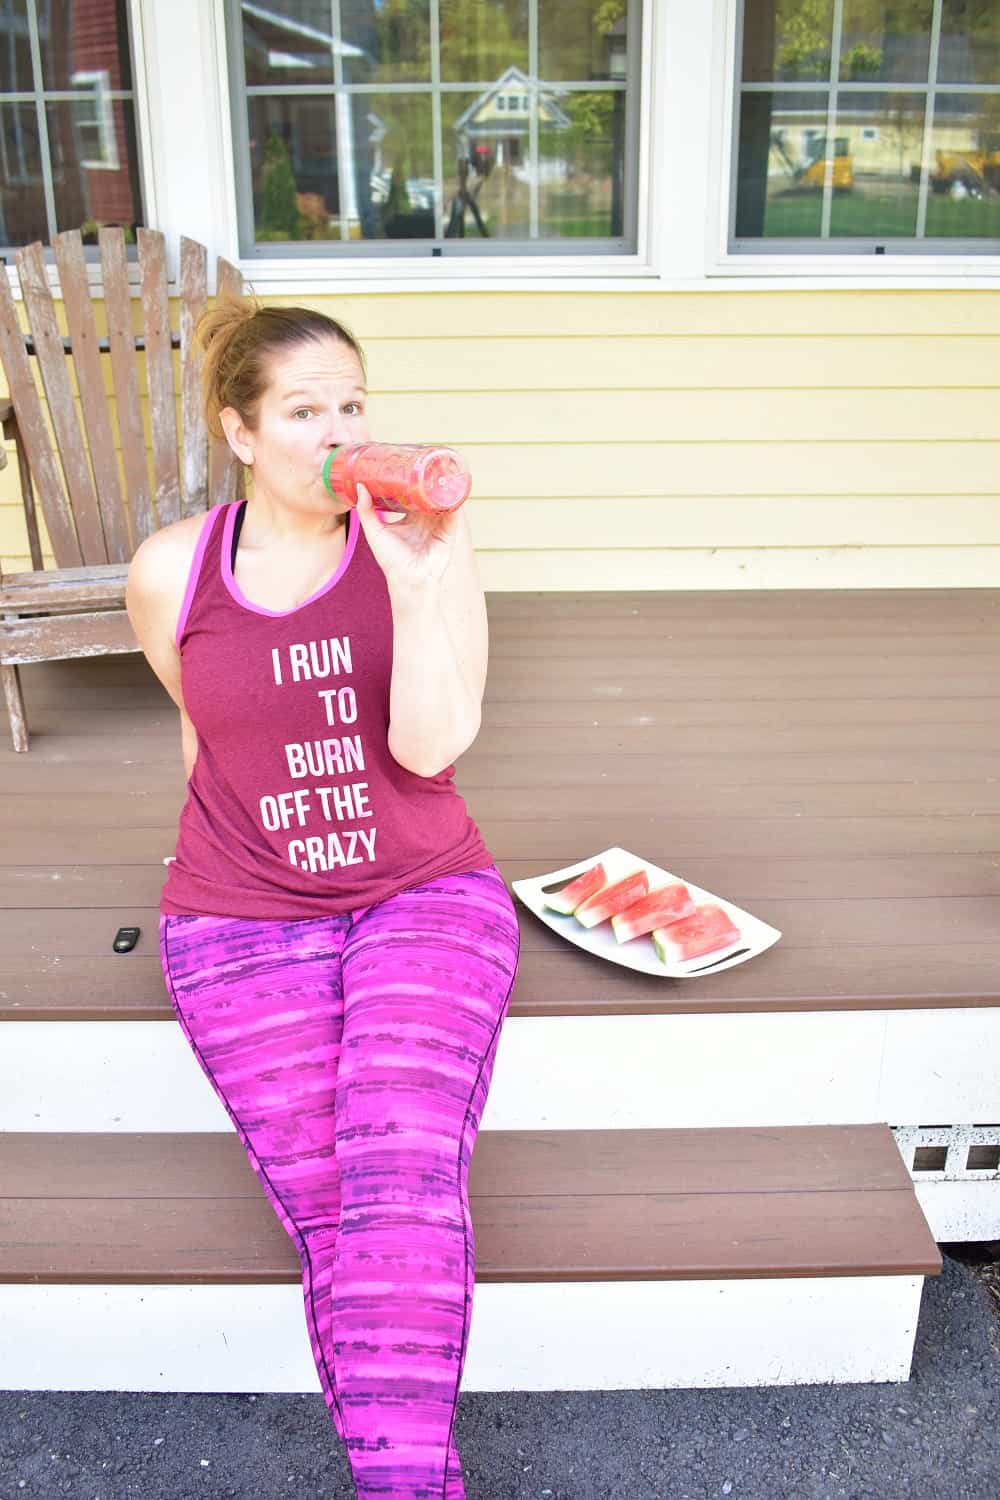 A woman drinking watermelon juice before a workout